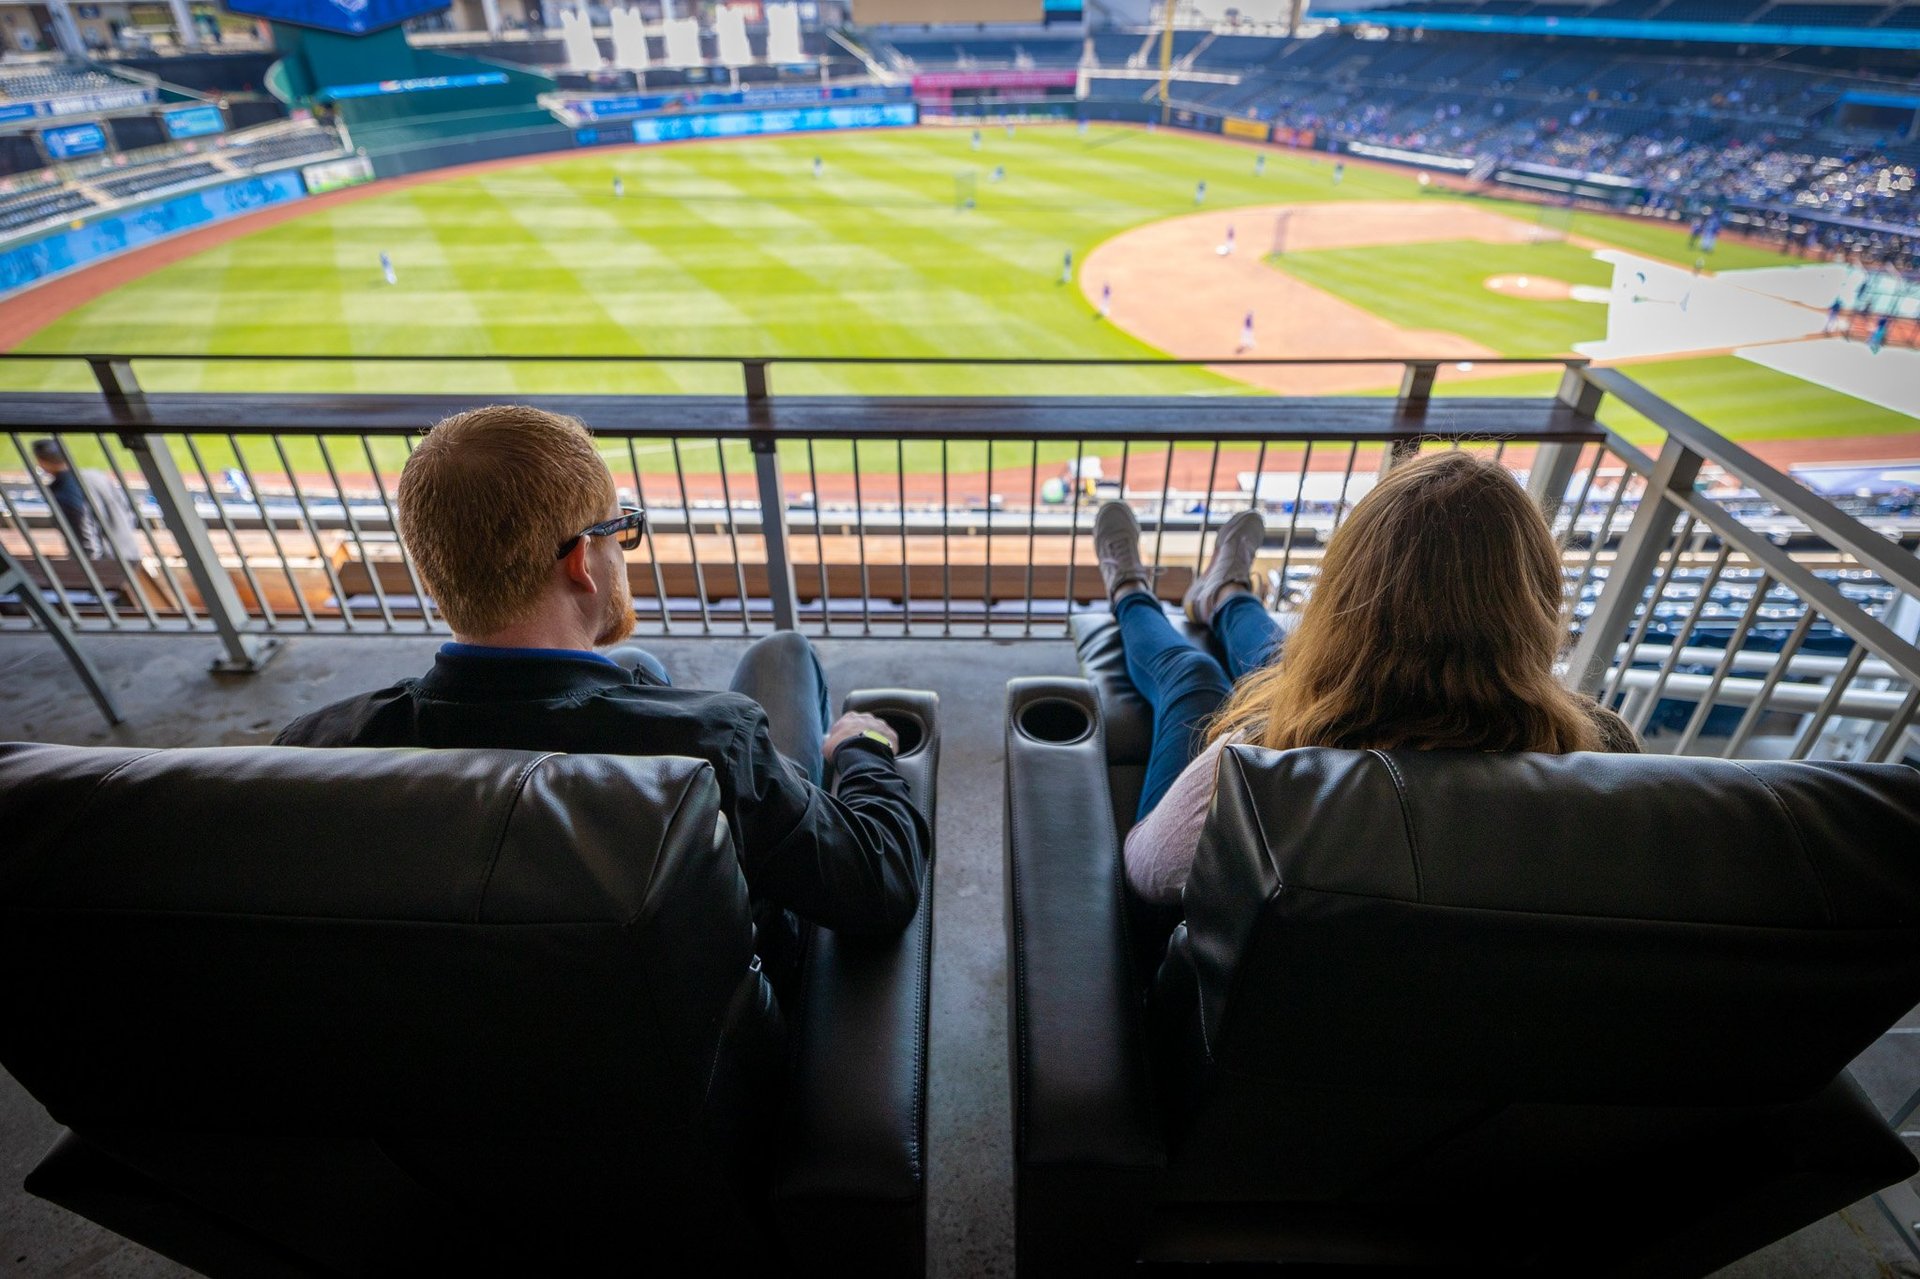 2 people sitting in black recliner chairs at Kauffman Stadium looking at the field